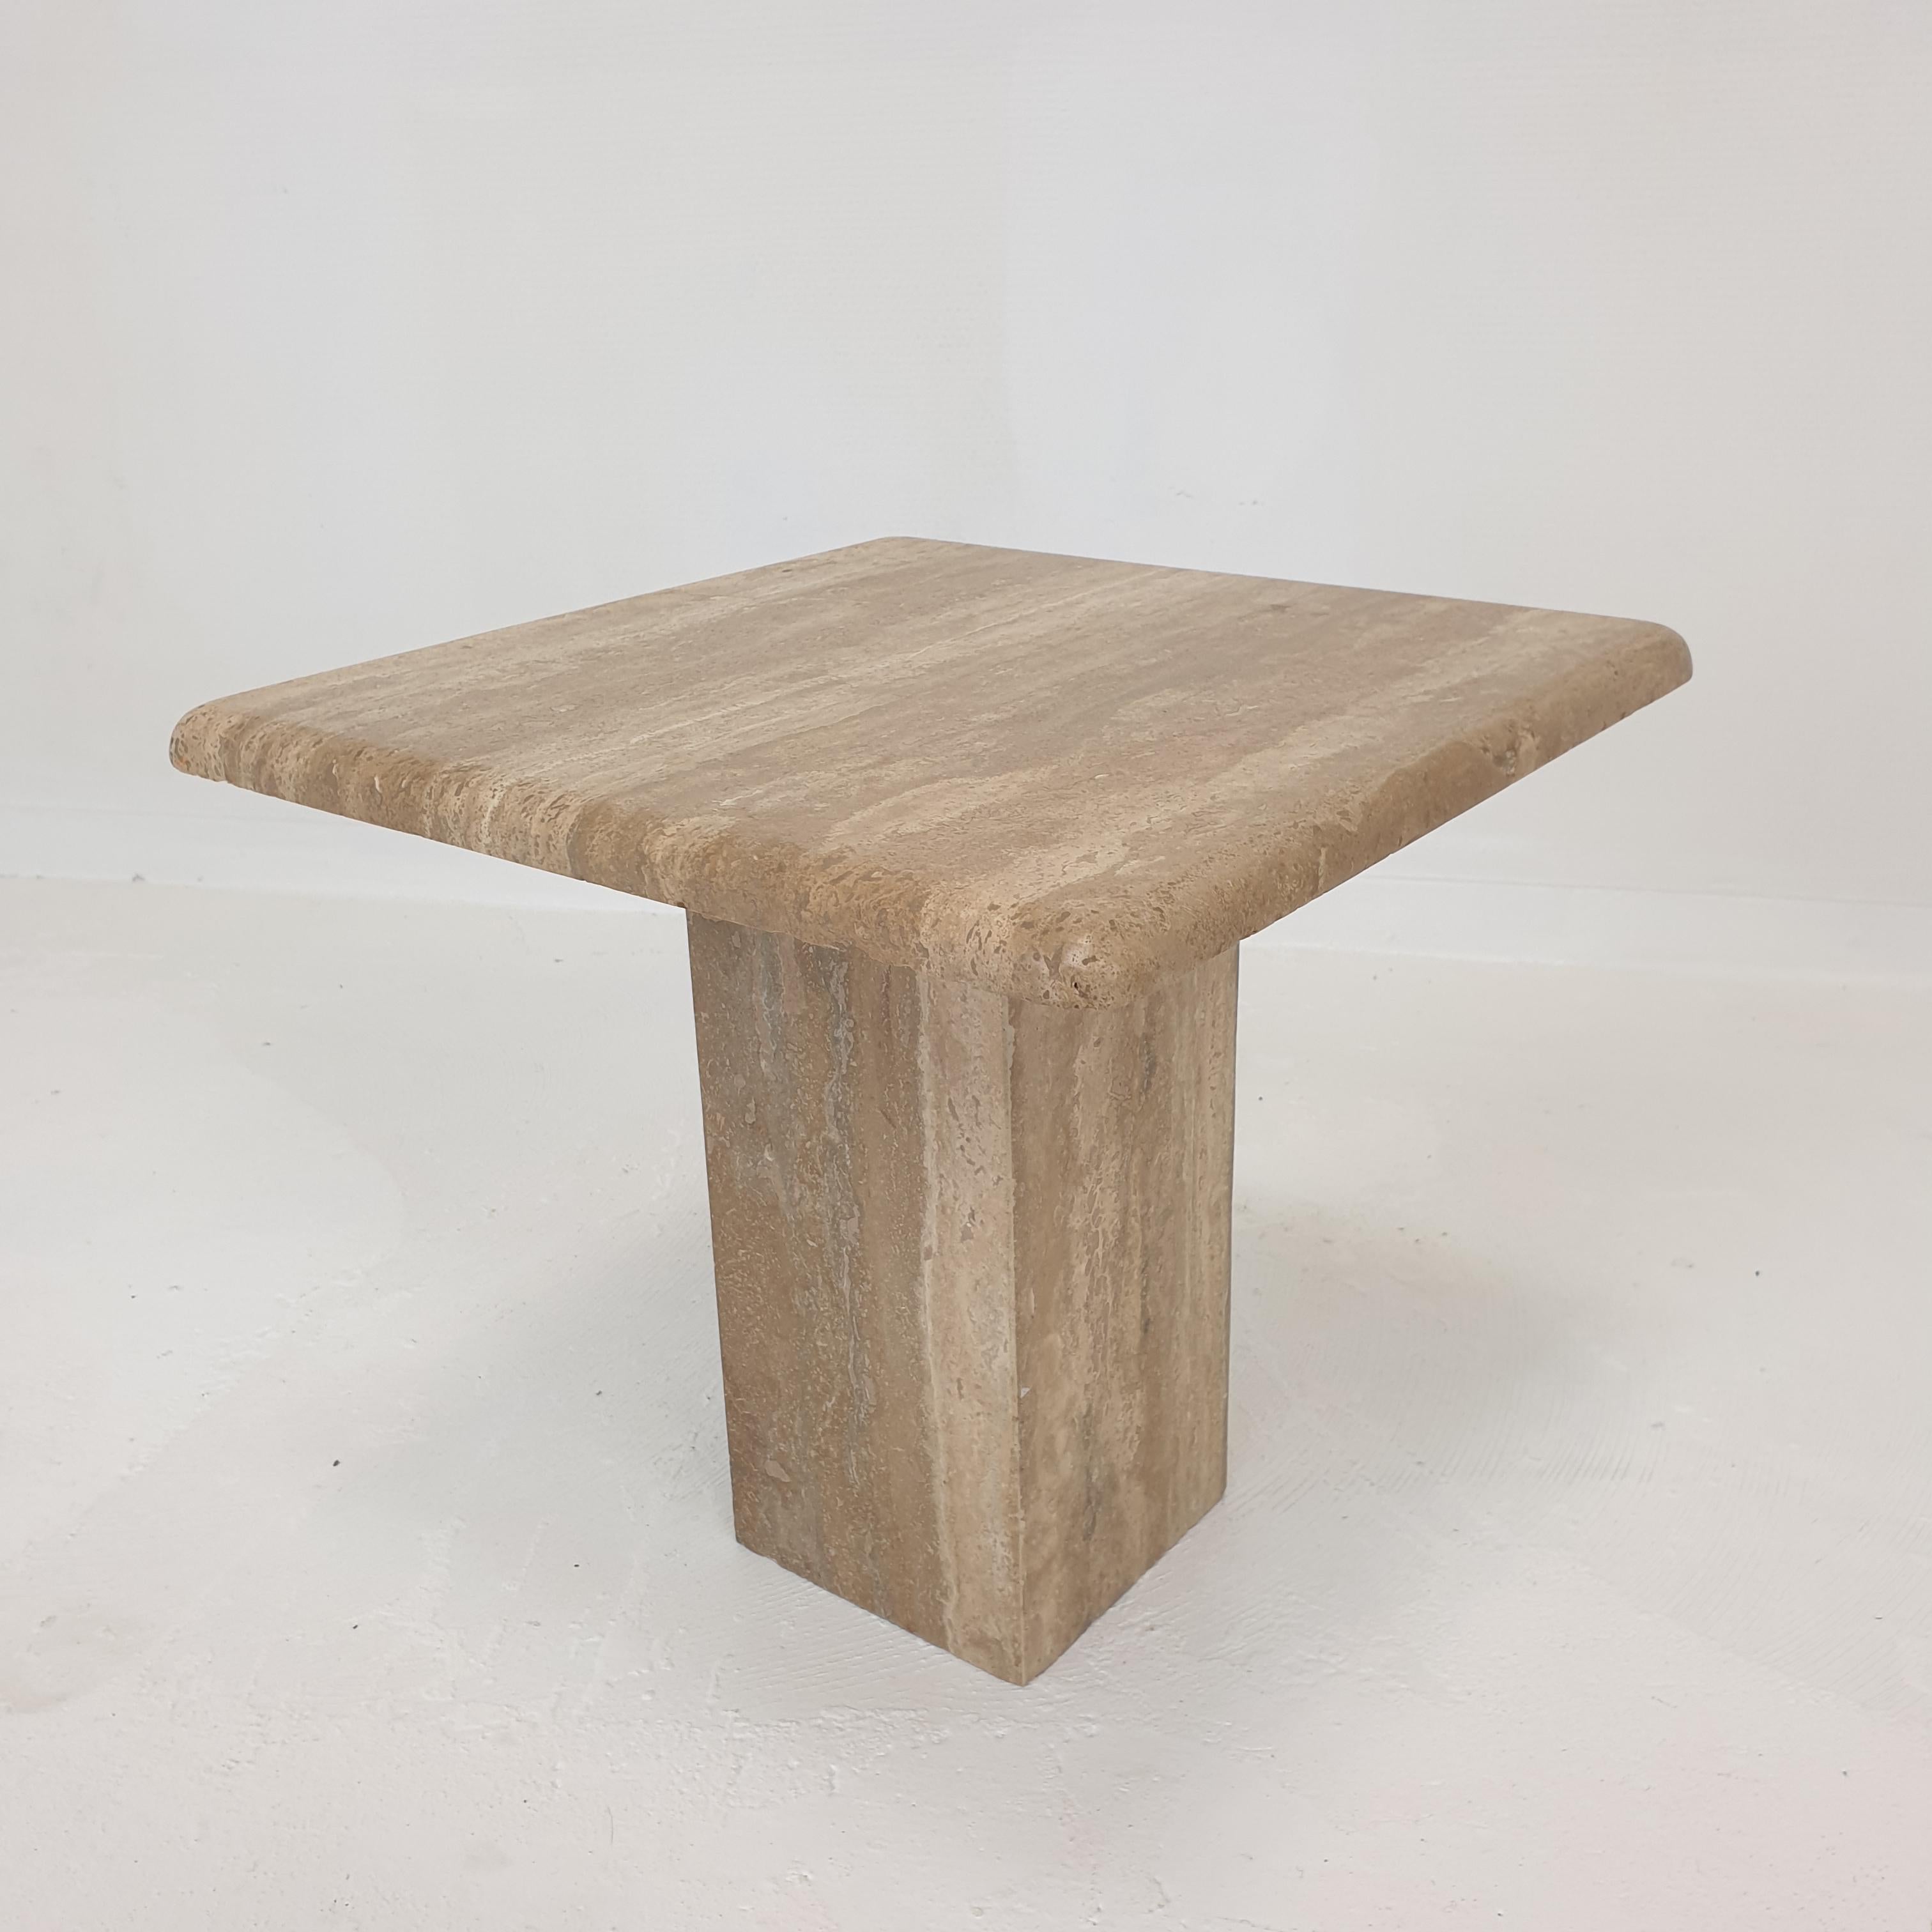 Set of 3 Italian Travertine Coffee Tables, 1980s For Sale 1